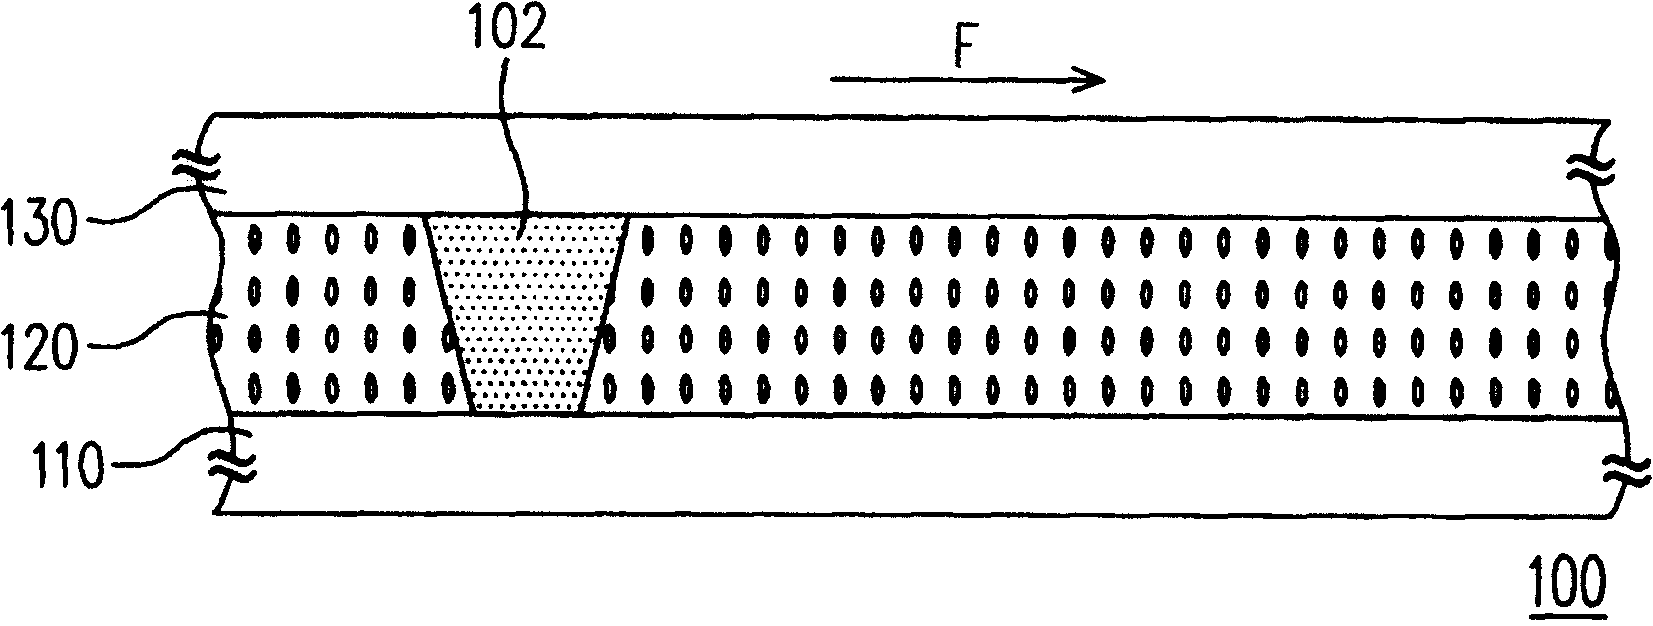 Liquid-crystal display panel and its production